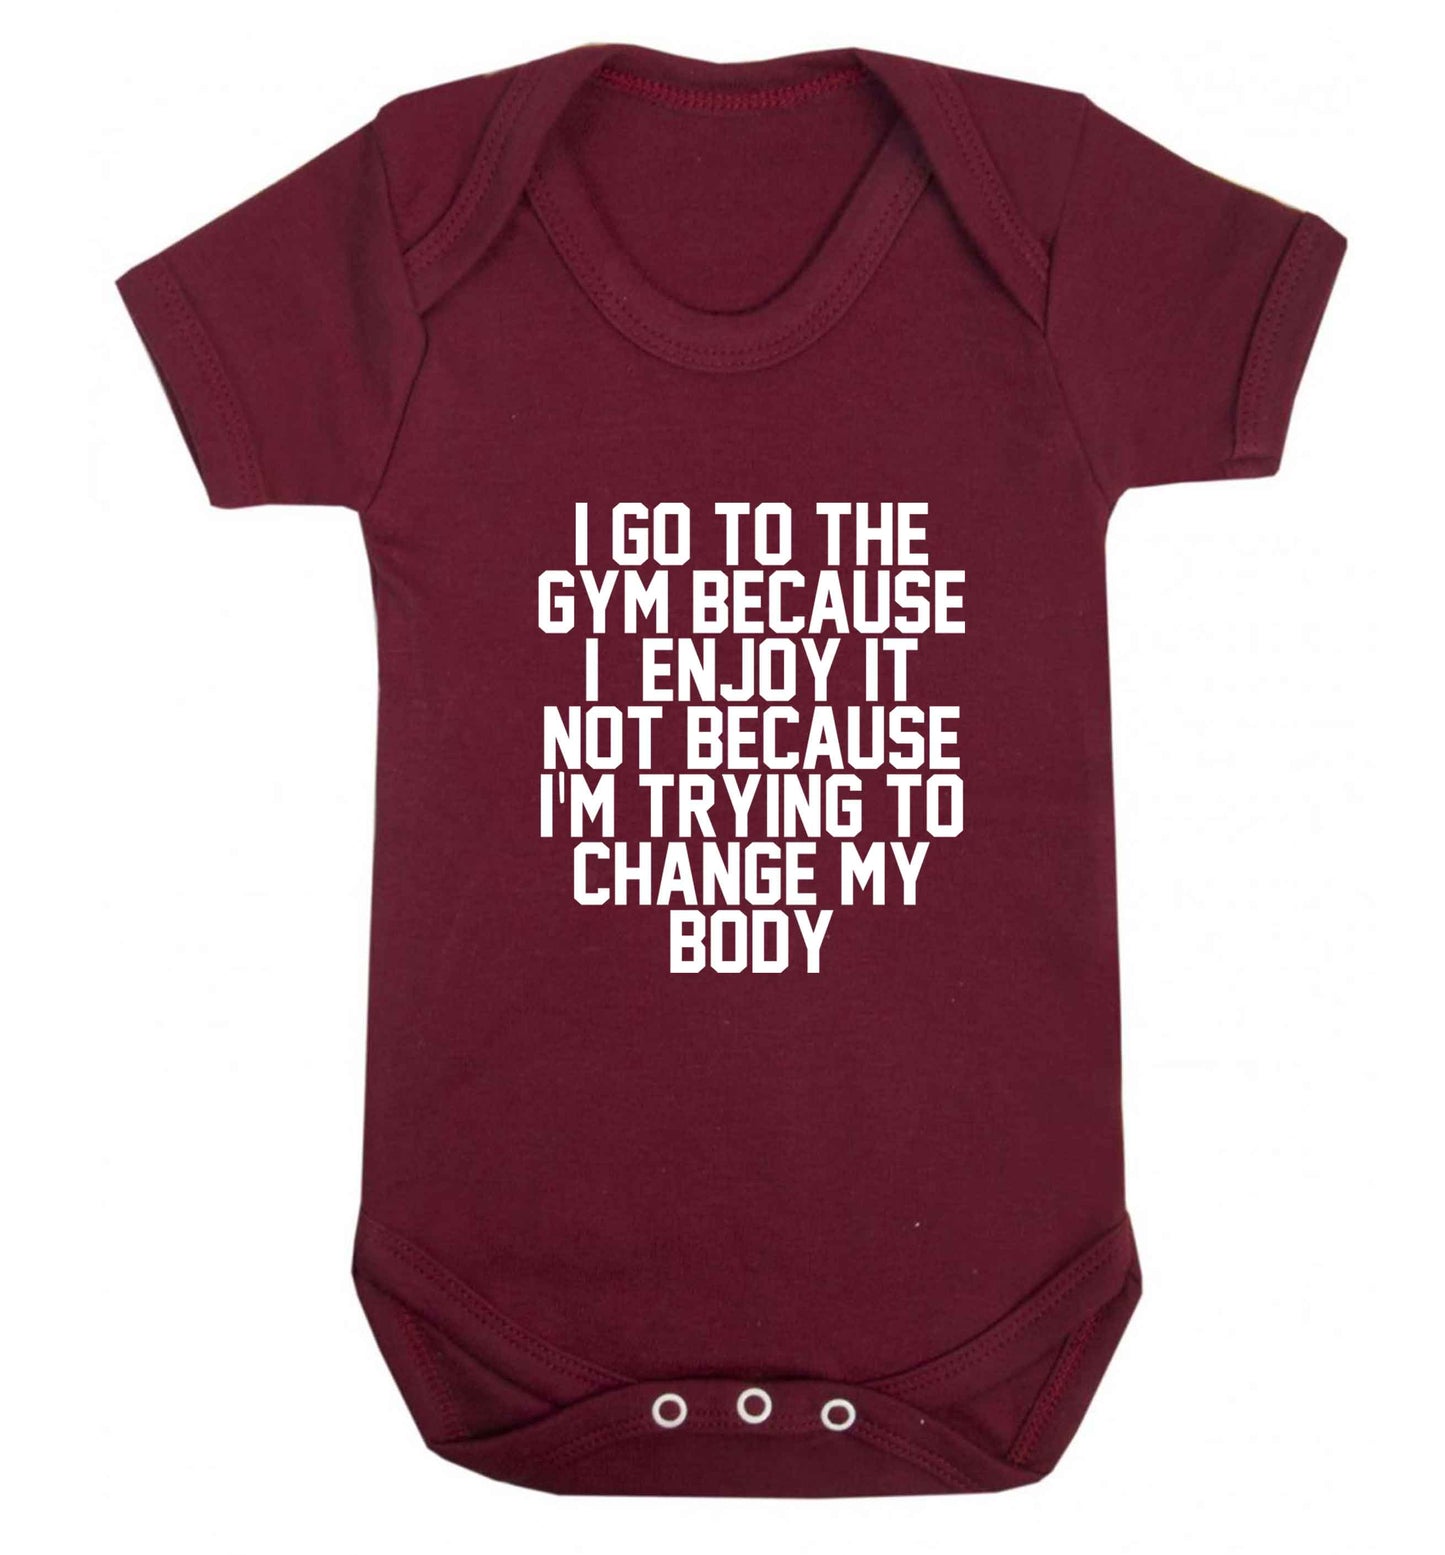 I go to the gym because I enjoy it not because I'm trying to change my body baby vest maroon 18-24 months